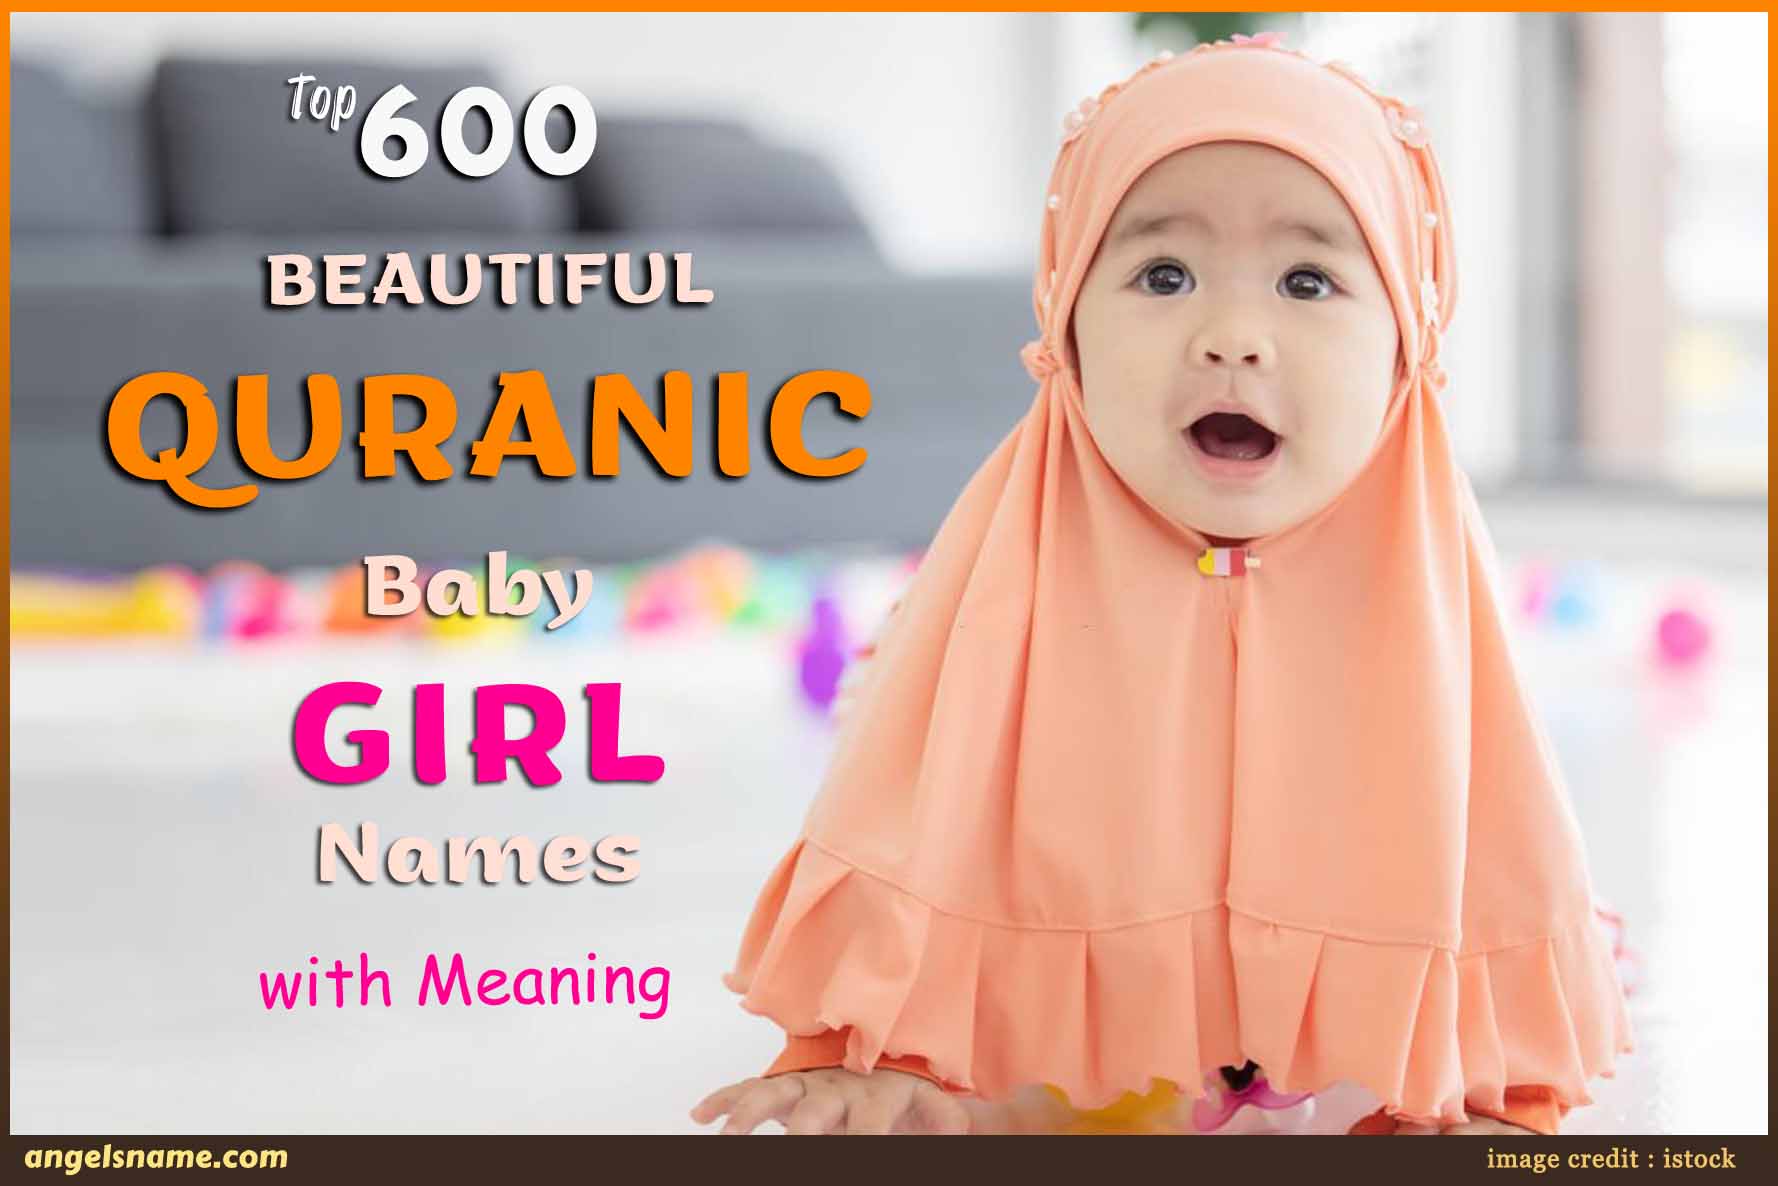 Top 600 Quranic Girl Names With Meaning